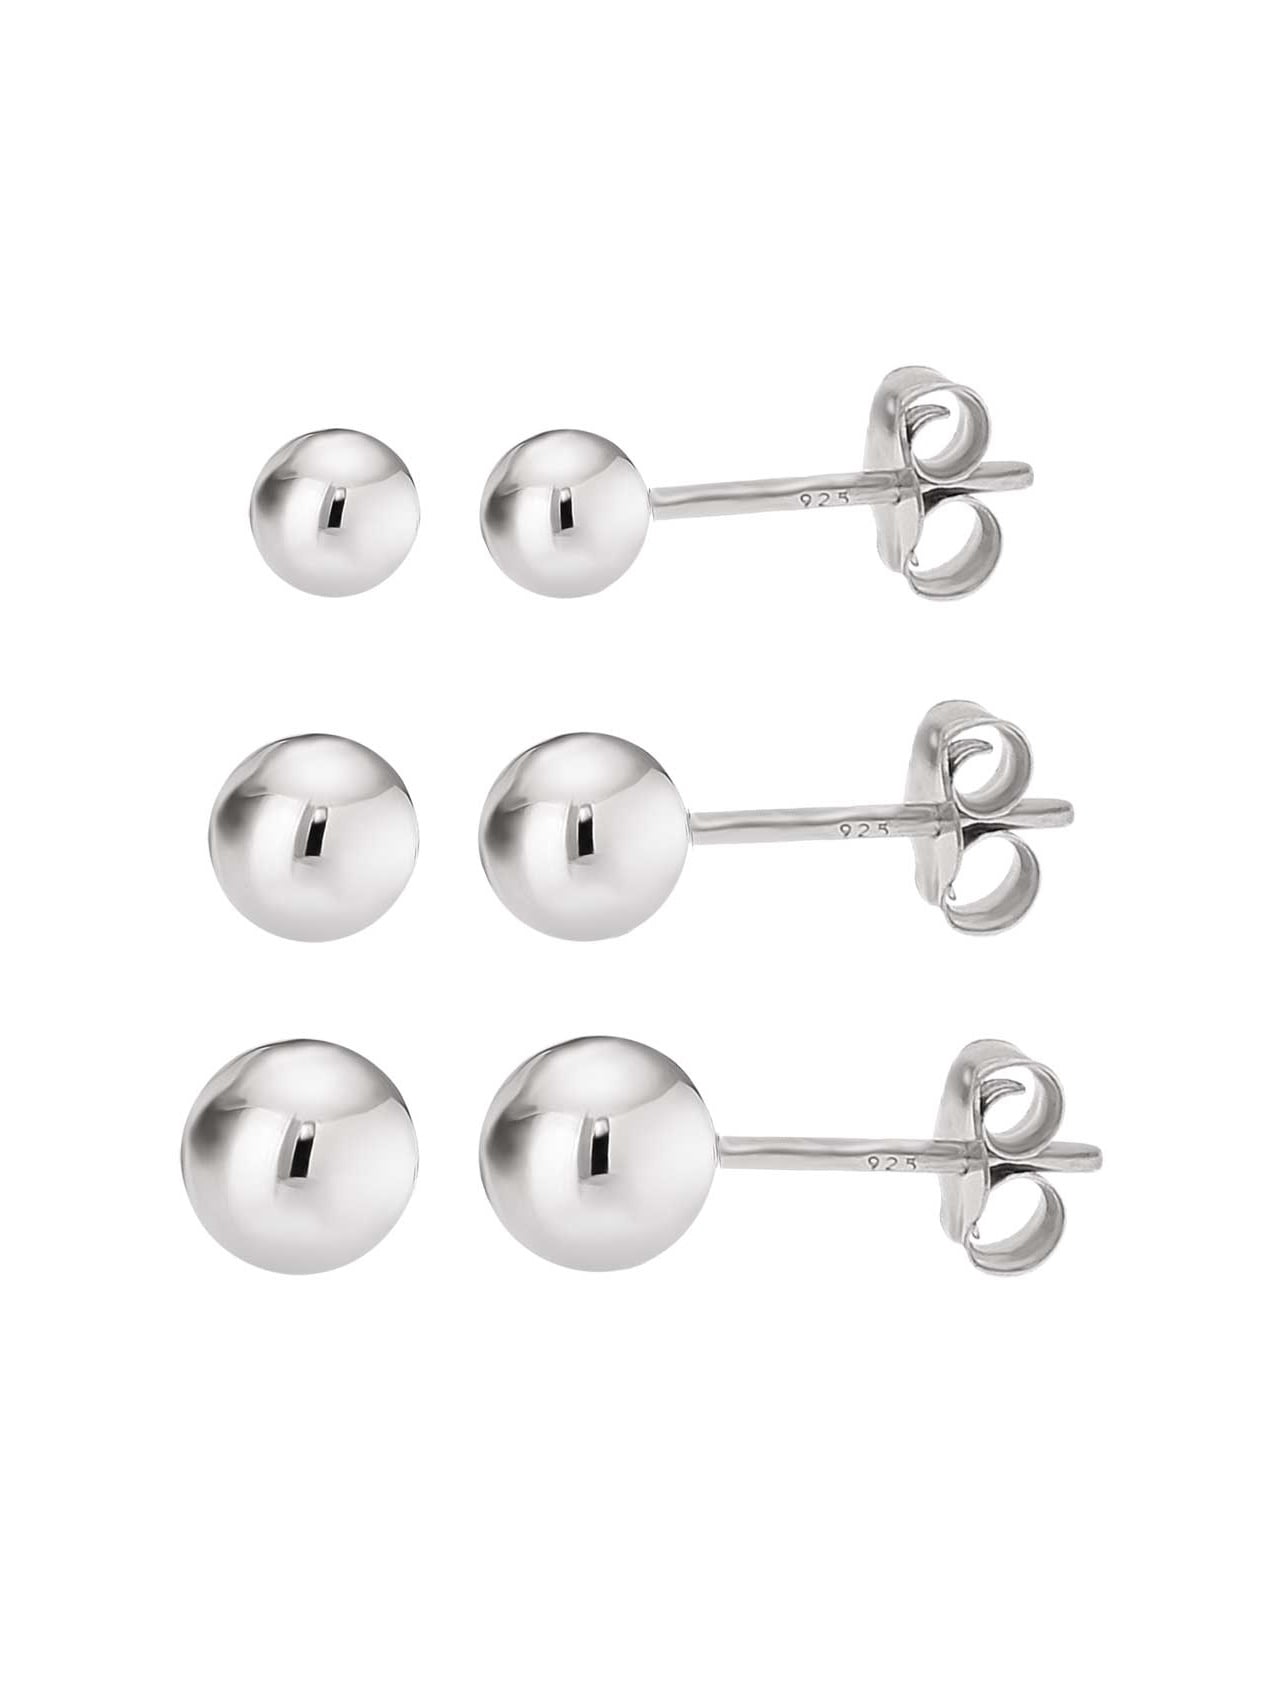 Sterling Silver Set of 3 Tri-Color Polished 5mm Ball Stud Earrings Set